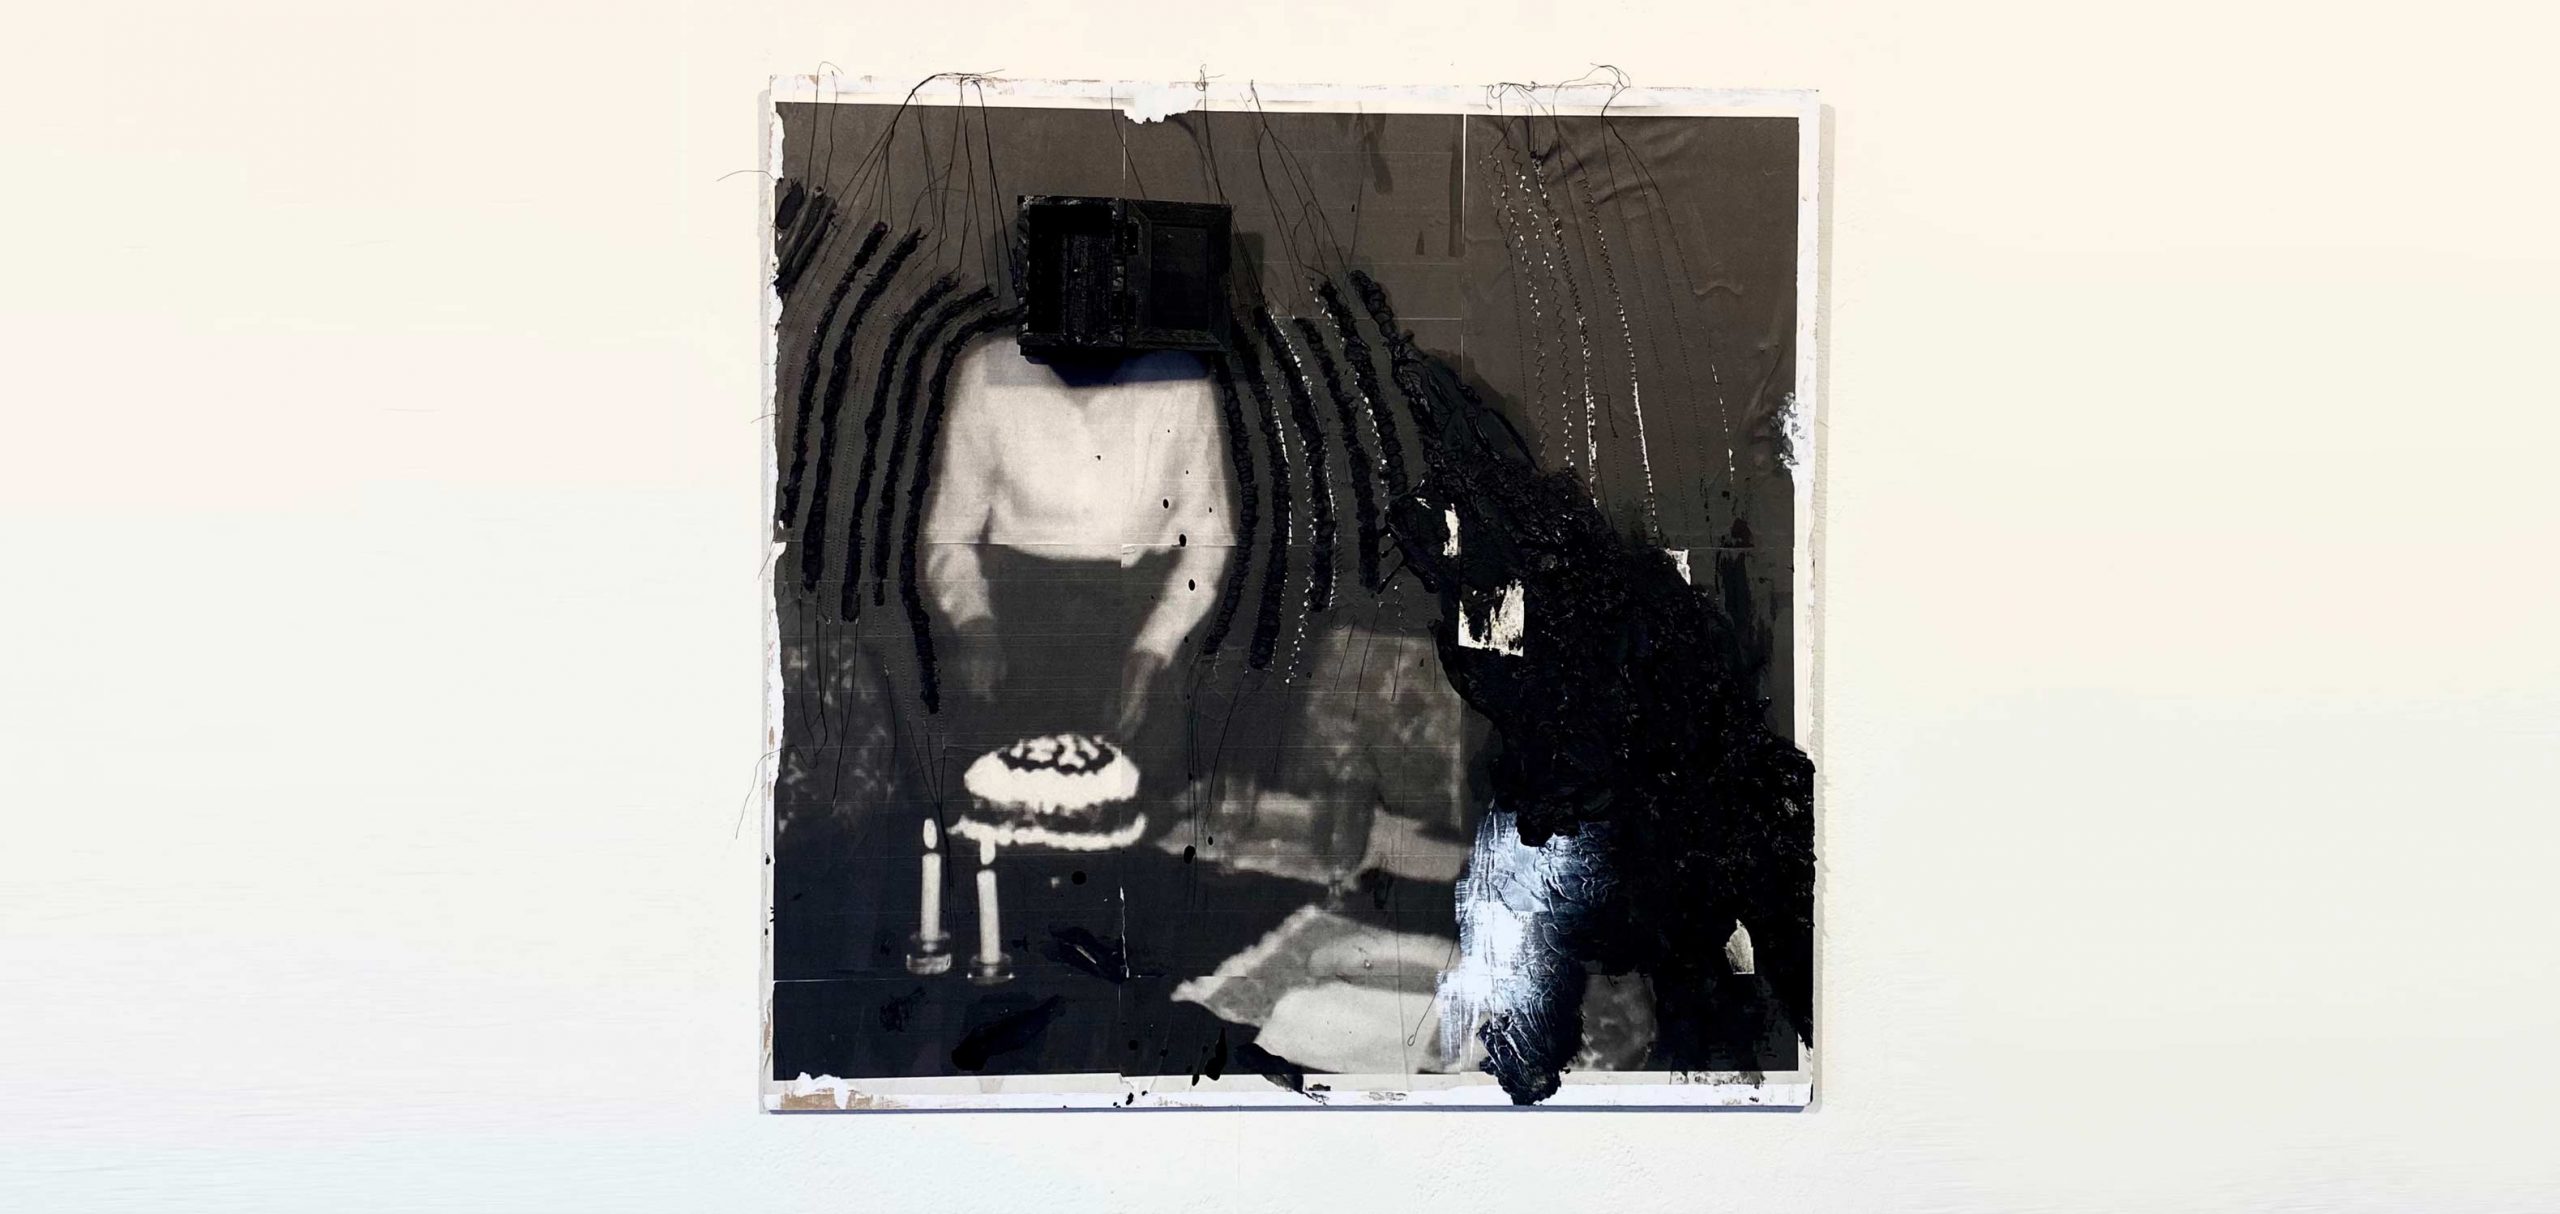 Black and white photo print altered with thread, acrylic paint, and wax. On the left is a person in white long-sleeve shirt with the head obscured by a black shape. The person is cutting a cake on a table with two candles and other semi-obscured table settings. The far right of the image is heavily obscured by added black ad white media..